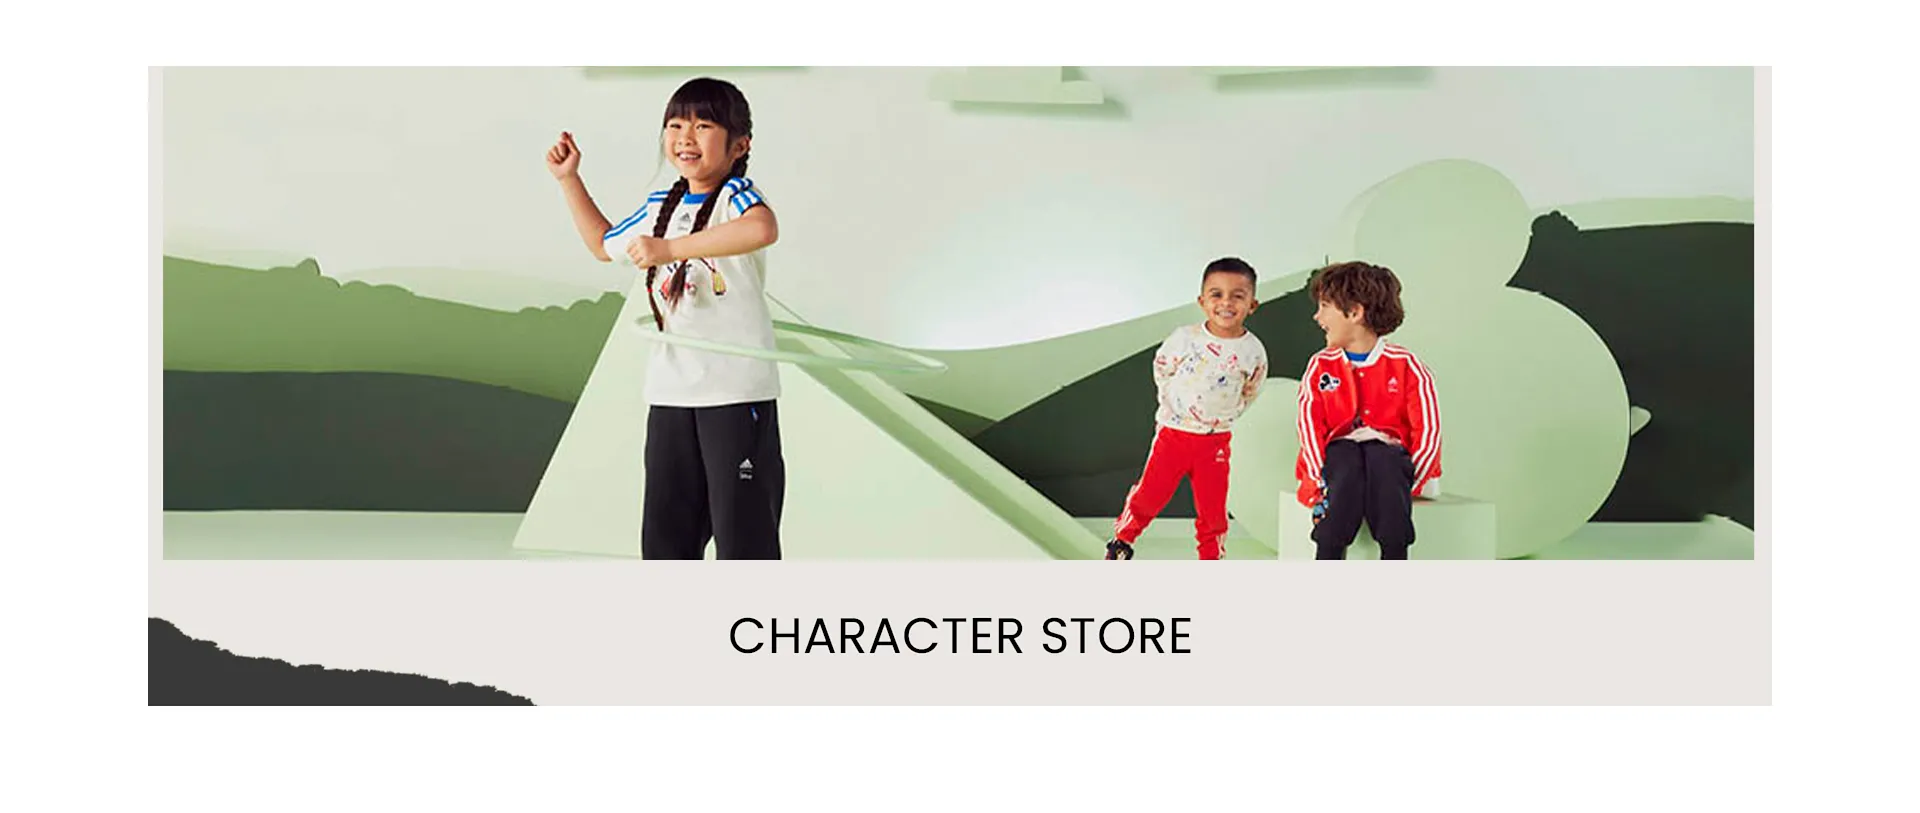 adidasBrandPage_CharacterStore_FH_Header_App_Clothes_All_adidas_Scroll_Cpid-926_20221004_